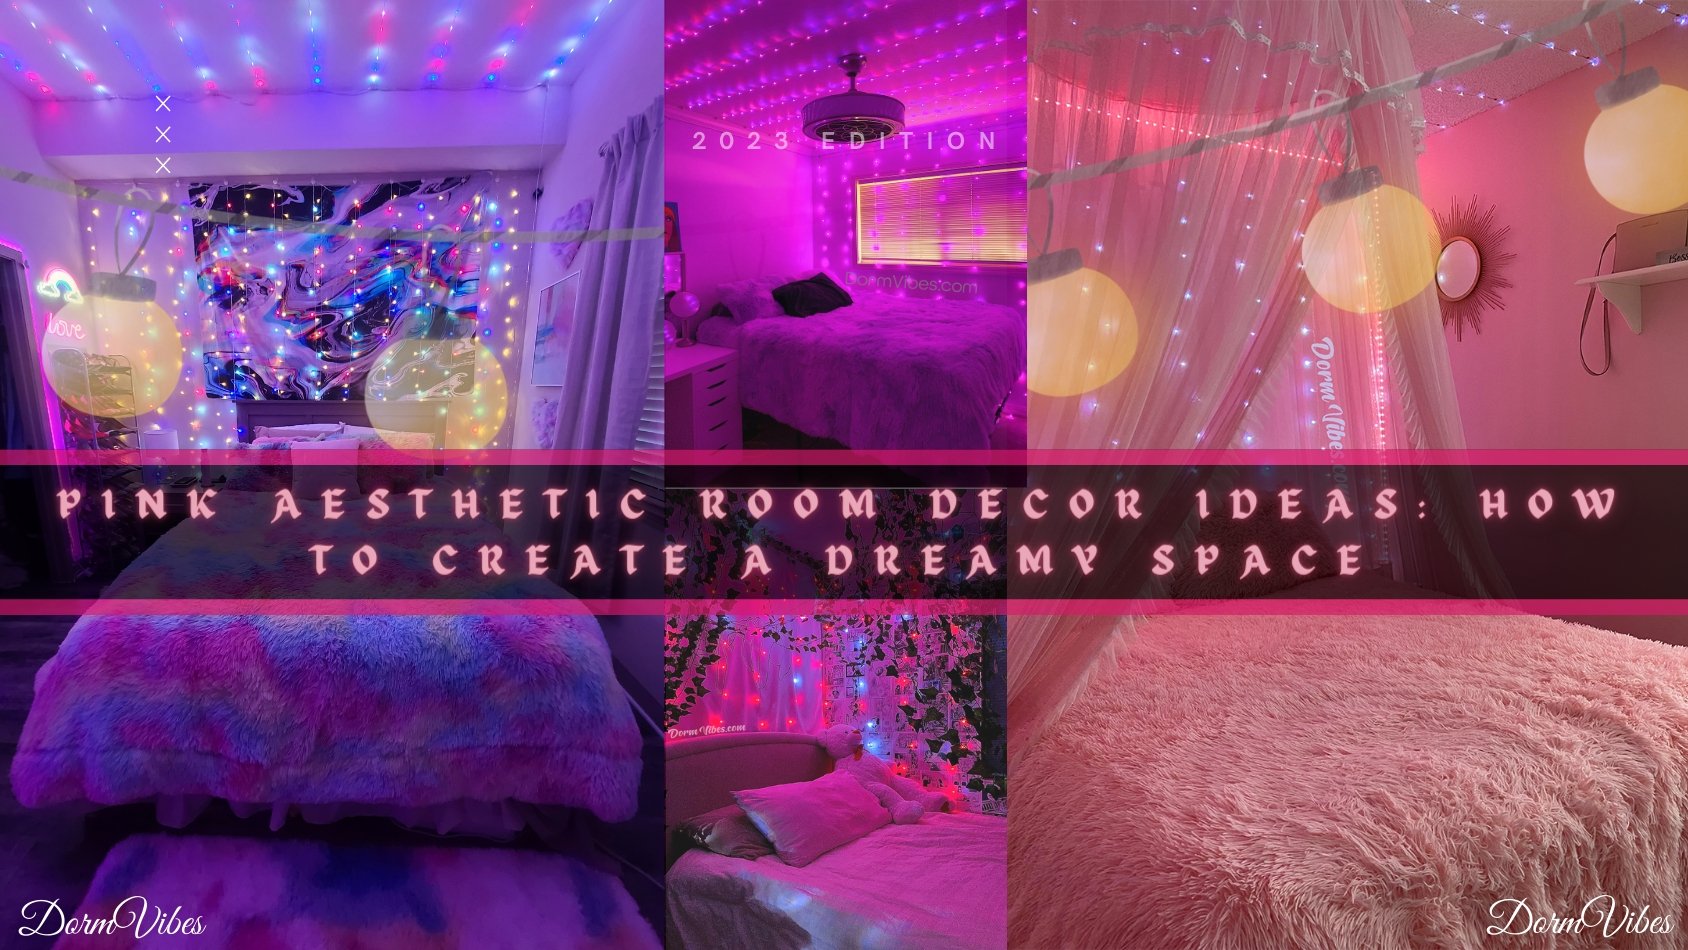 The Ultimate Guide to Pink Aesthetic Room Decor – DormVibes